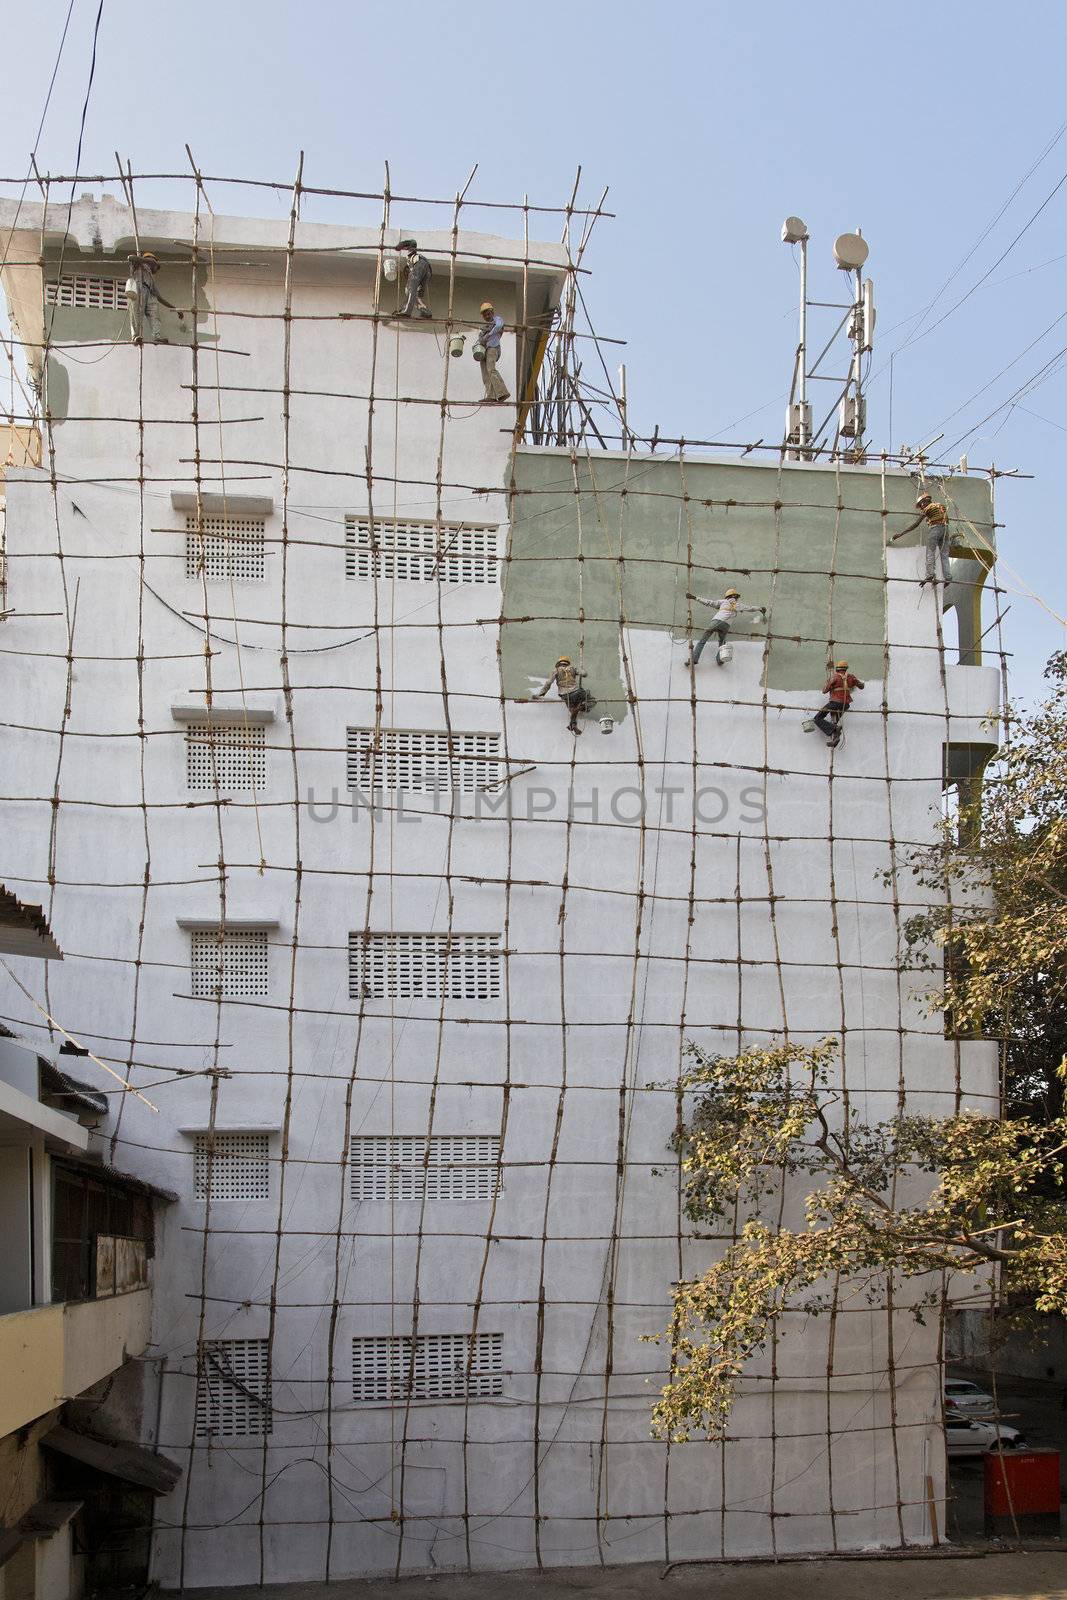 Gang of Indian barefoot Decorators painting exterior of a five story industrial building on a bamboo scaffold